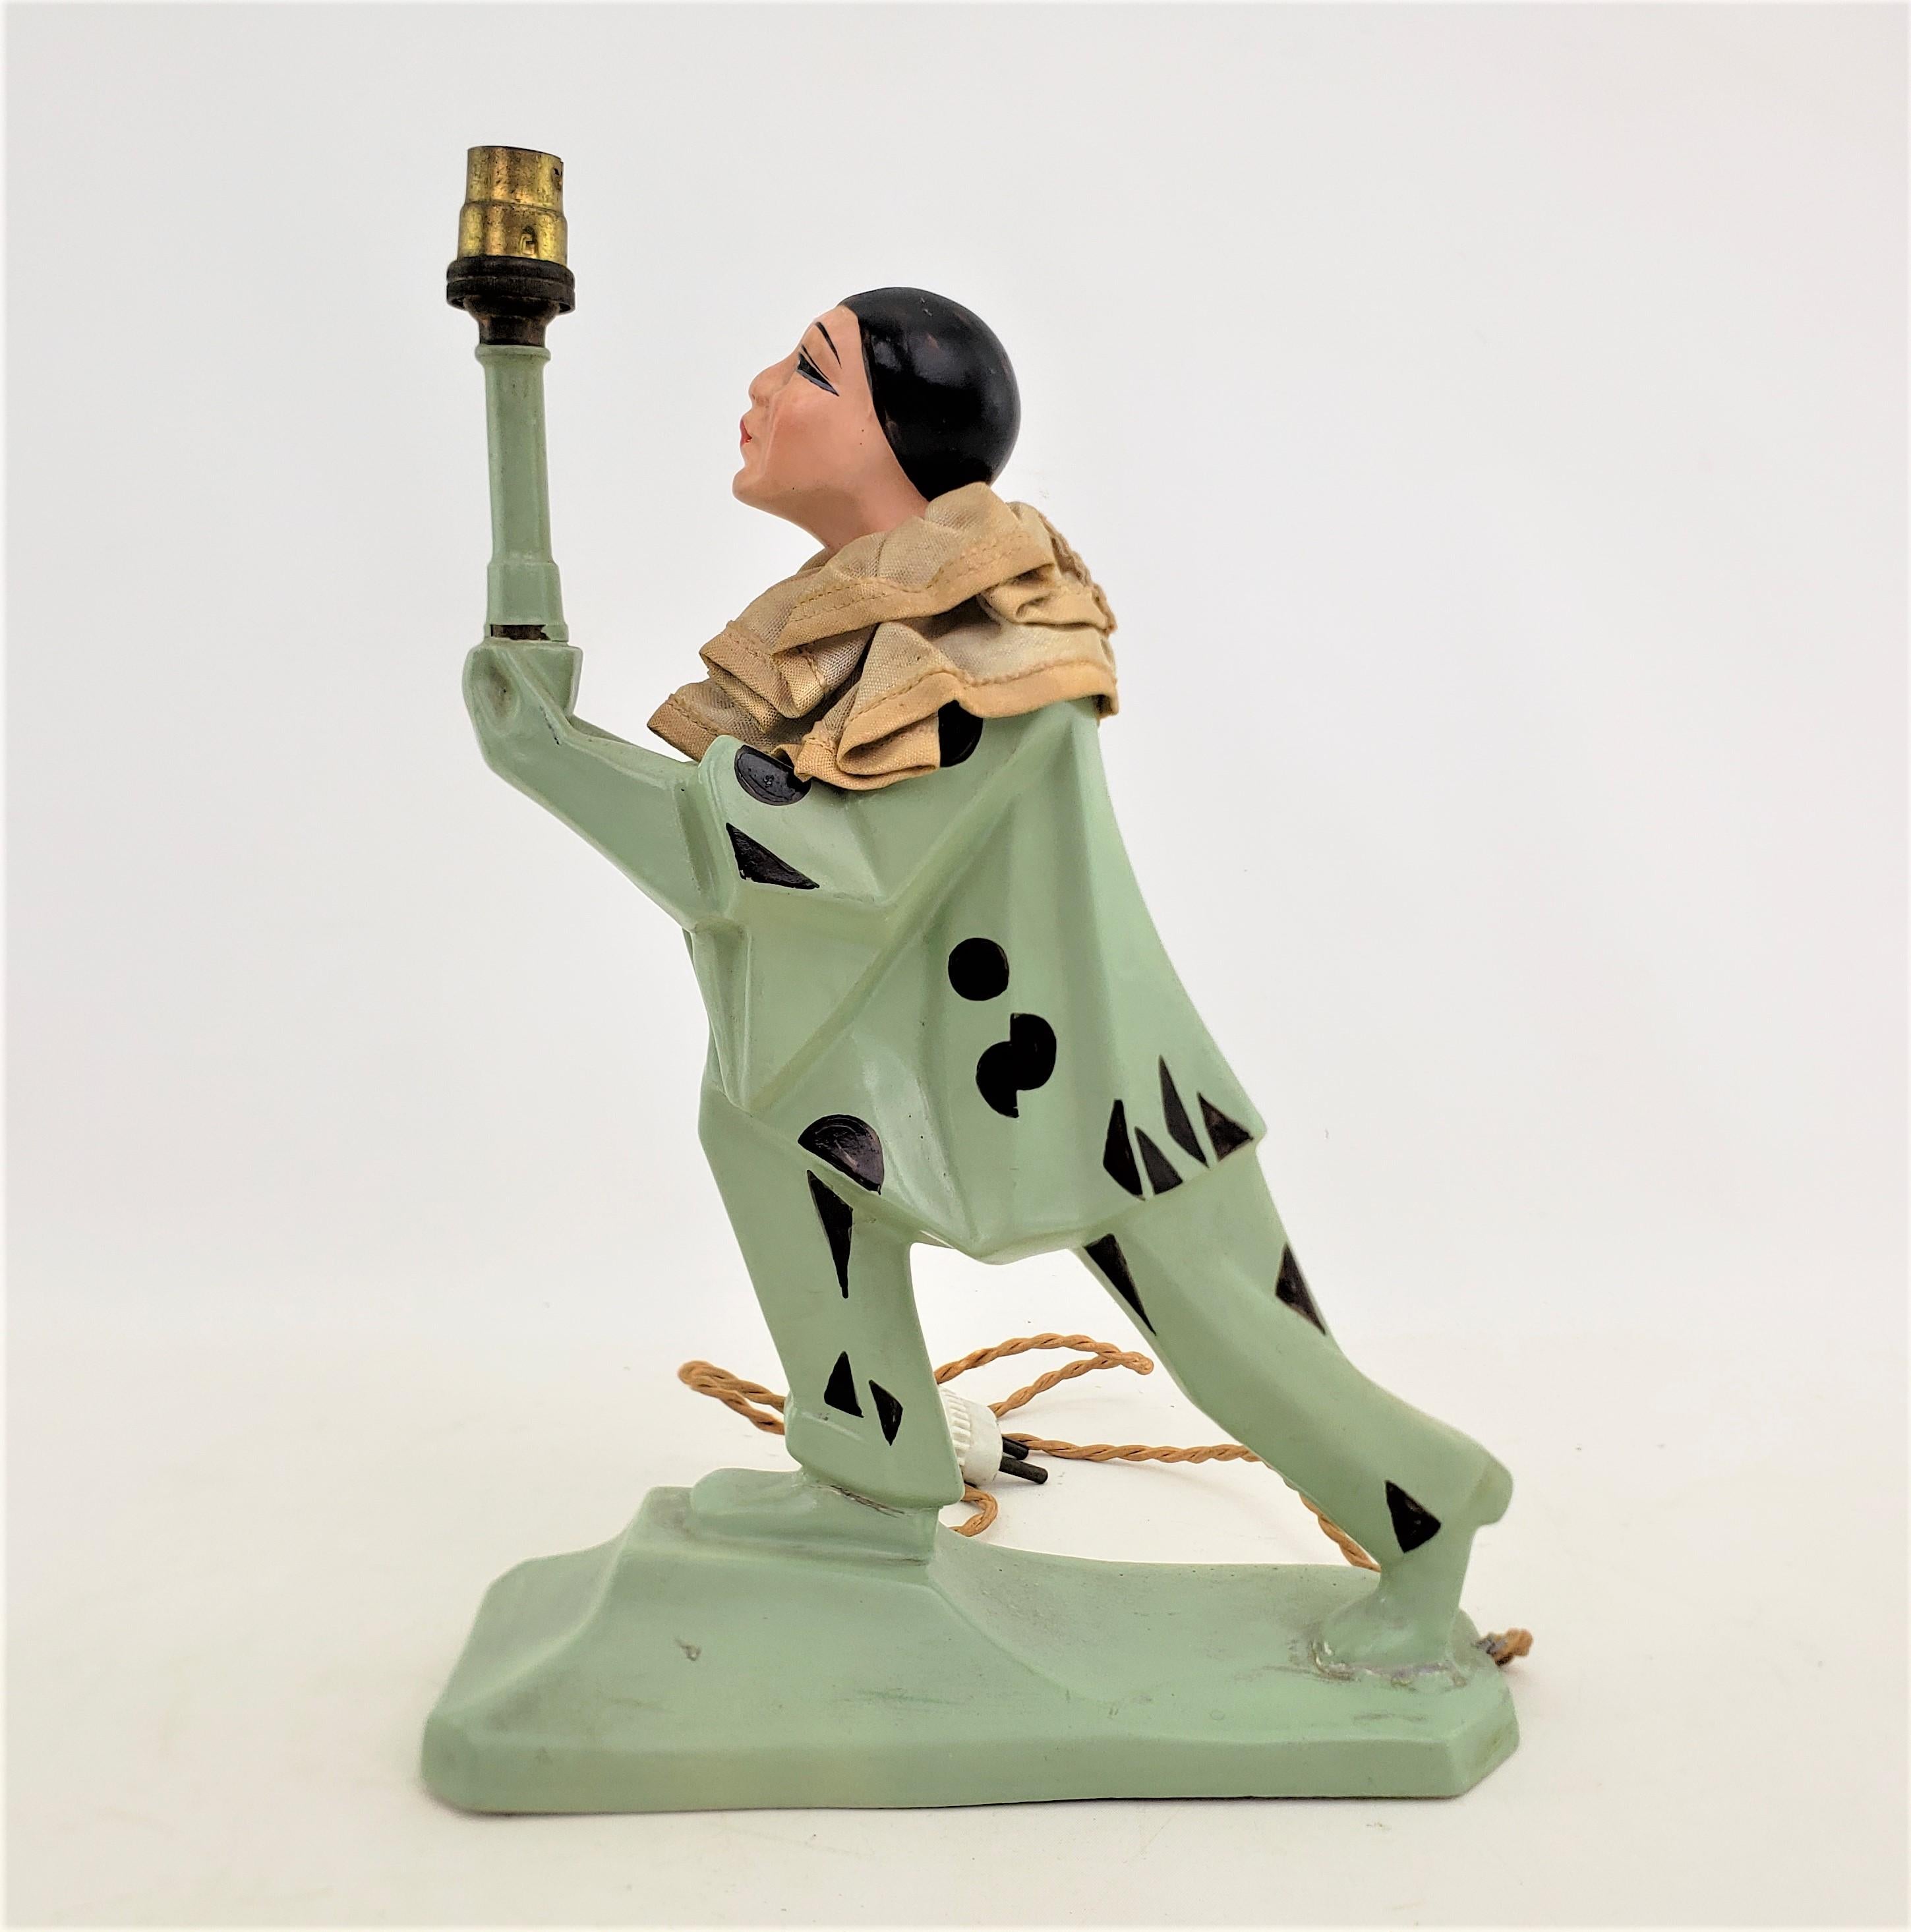 Molded Antique French Art Deco Cubist Harlequin or Clown Figural Table or Boudoir Lamp For Sale